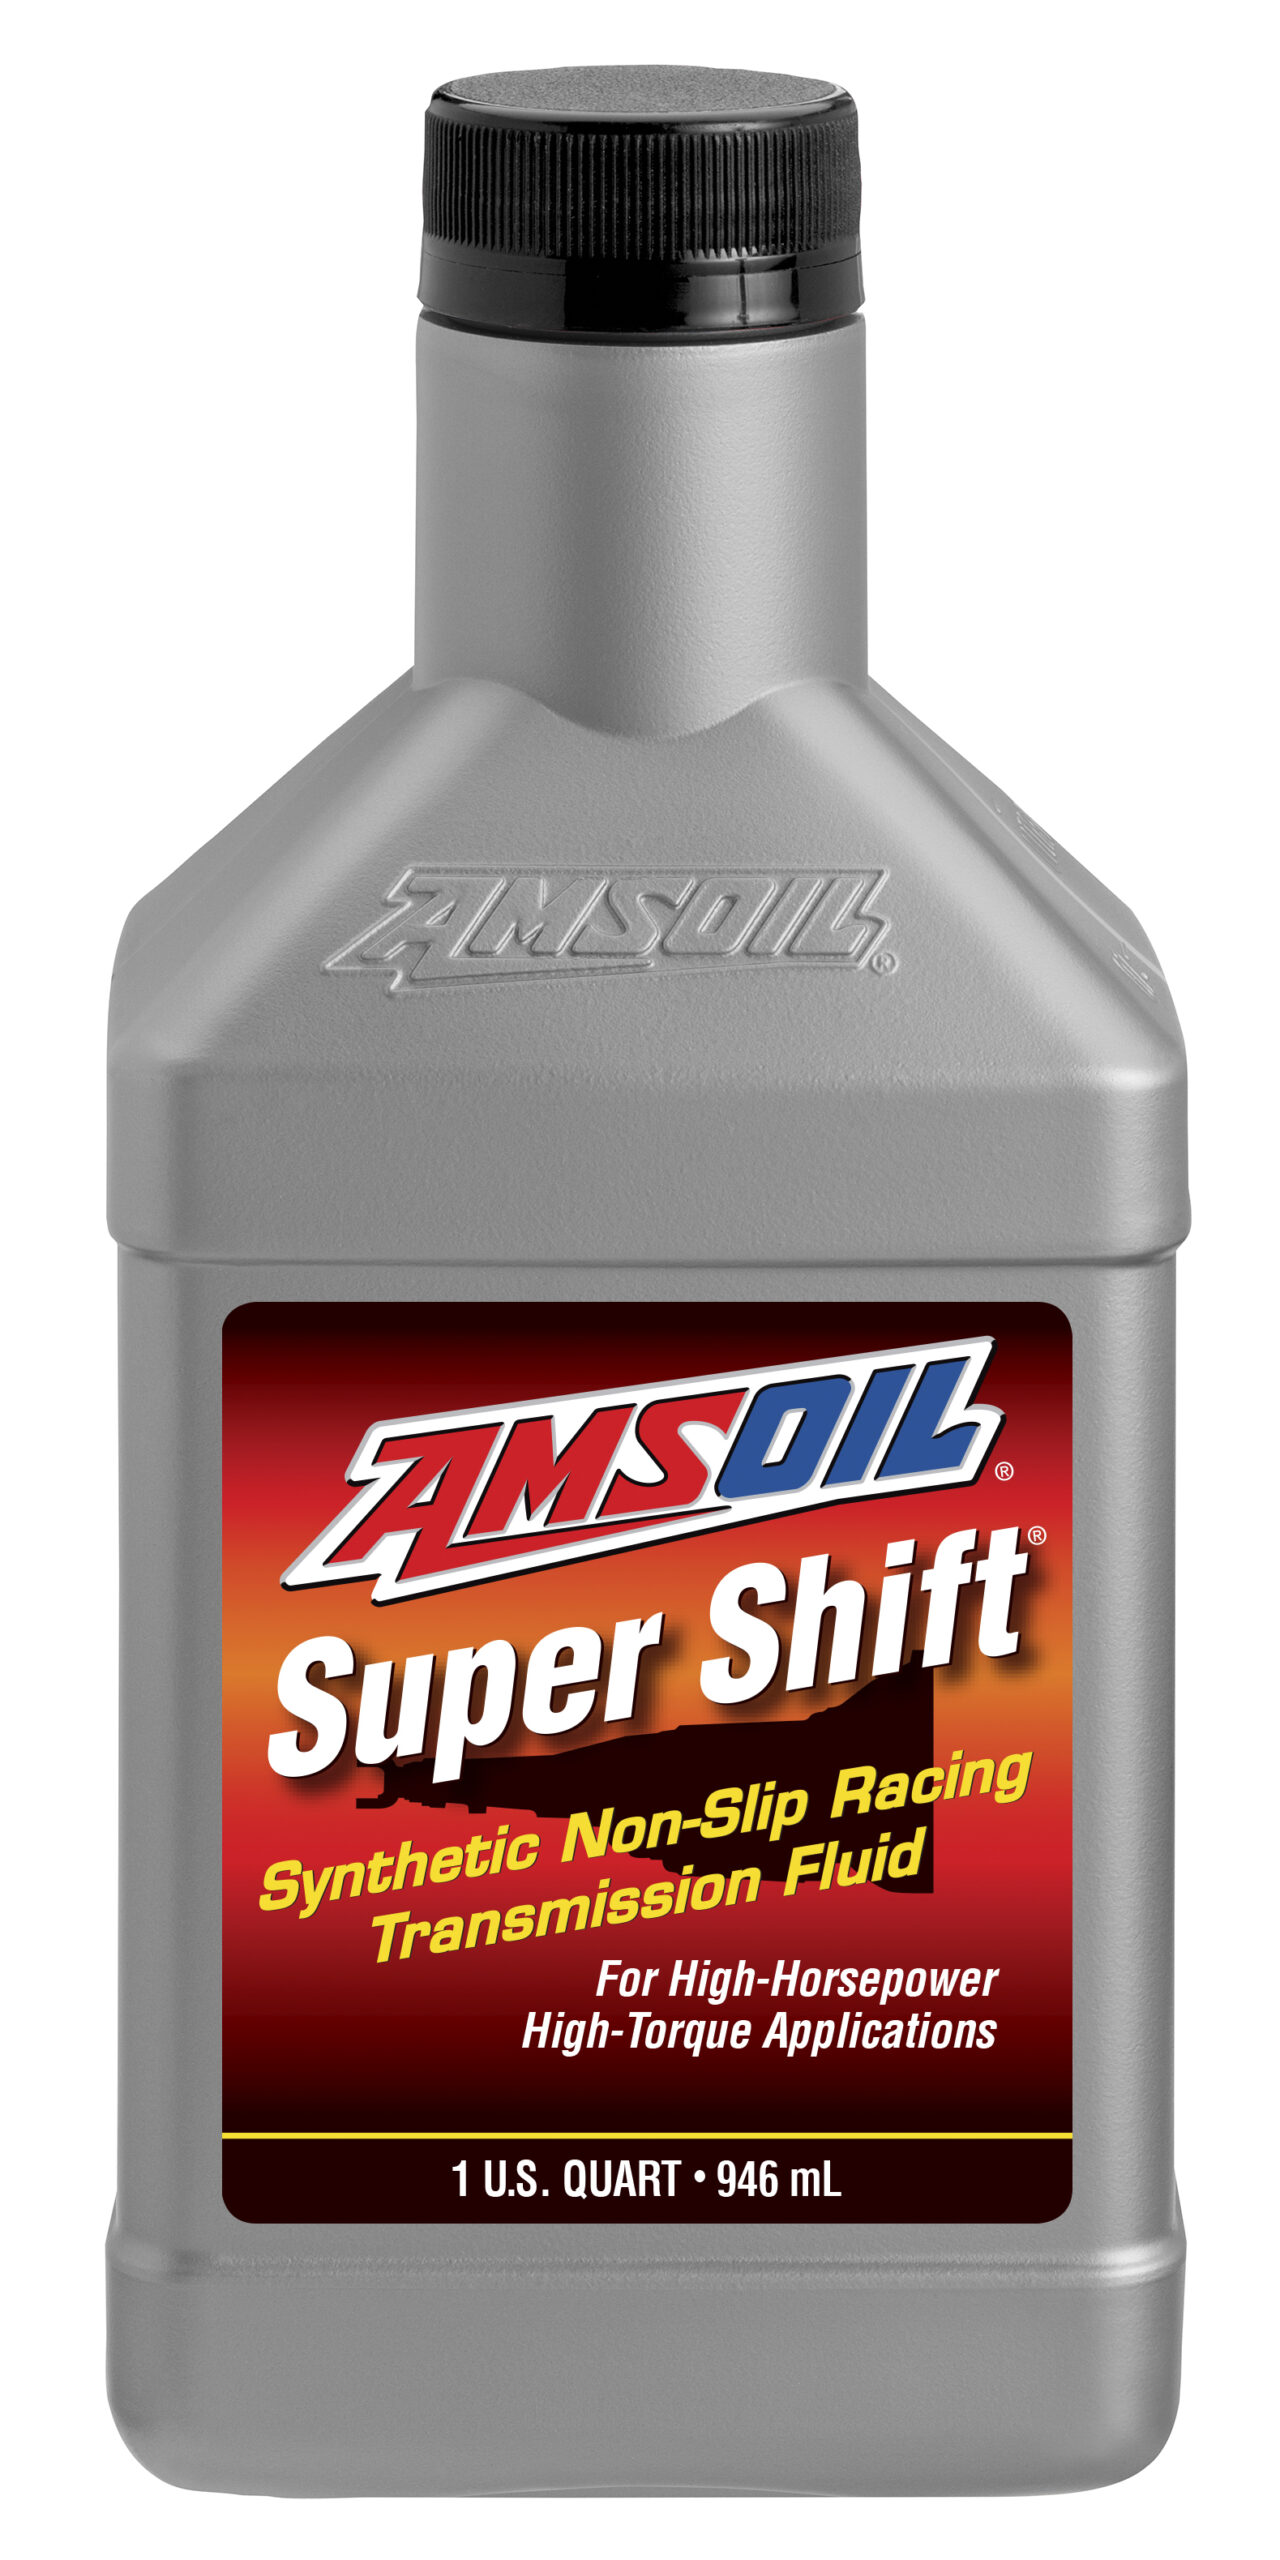 A bottle of AMSOIL Synthetic Racing Transmission Fluid, designed to resist heat to virtually eliminate slippage and improve shift performance while protecting against wear.